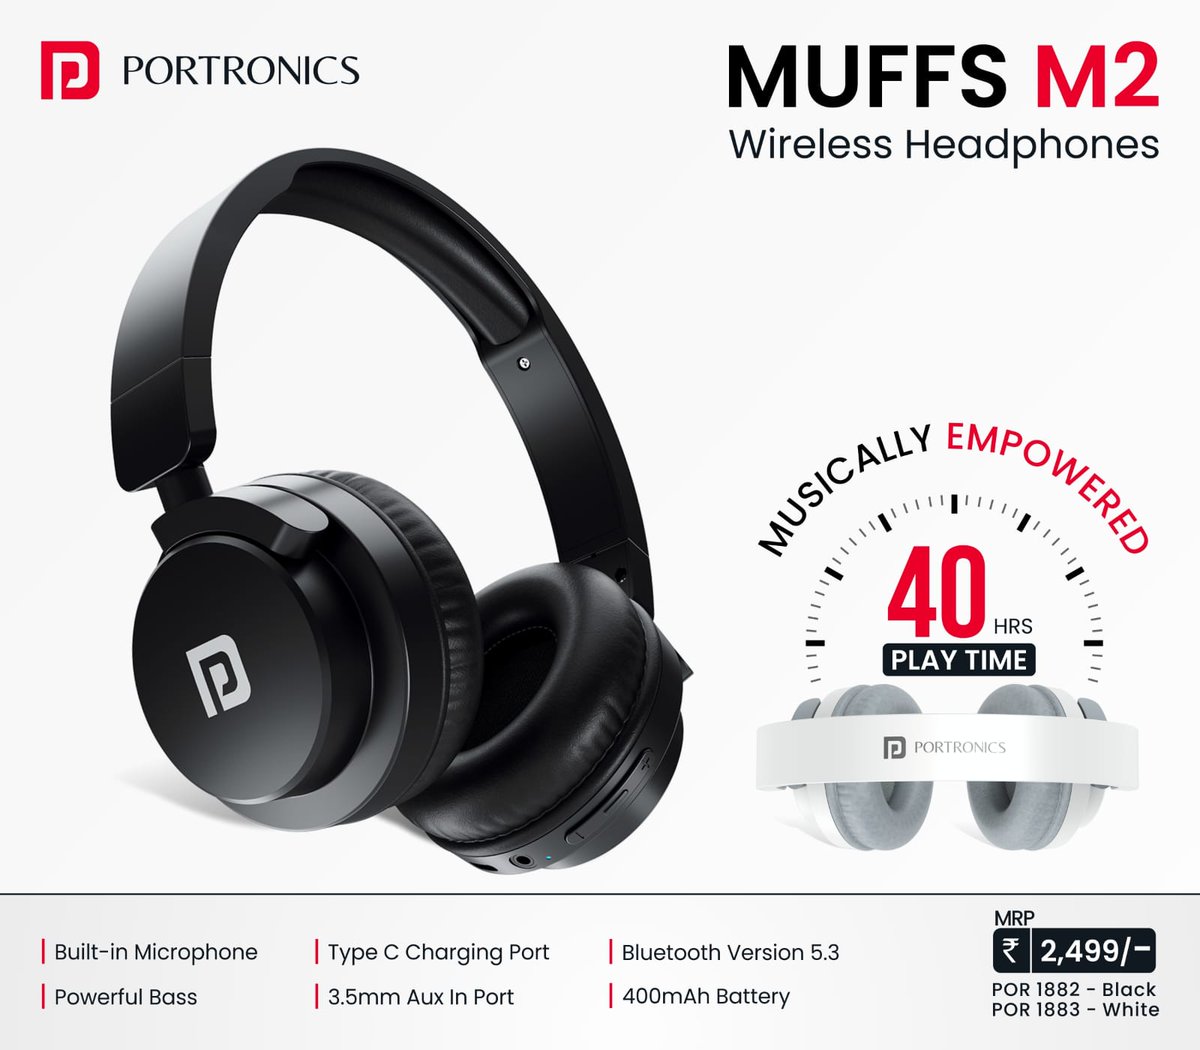 Immerse yourself in crystal-clear audio with the Portronics Muffs M2 Wireless Headphones!

Shop now 
Free Shipping available
Follow for more

DM me for more details 
Call 8144814458

#Portronics #MuffsM2 #WirelessHeadphones #SuperiorSound #CrystalClearCalls #ComfortFit